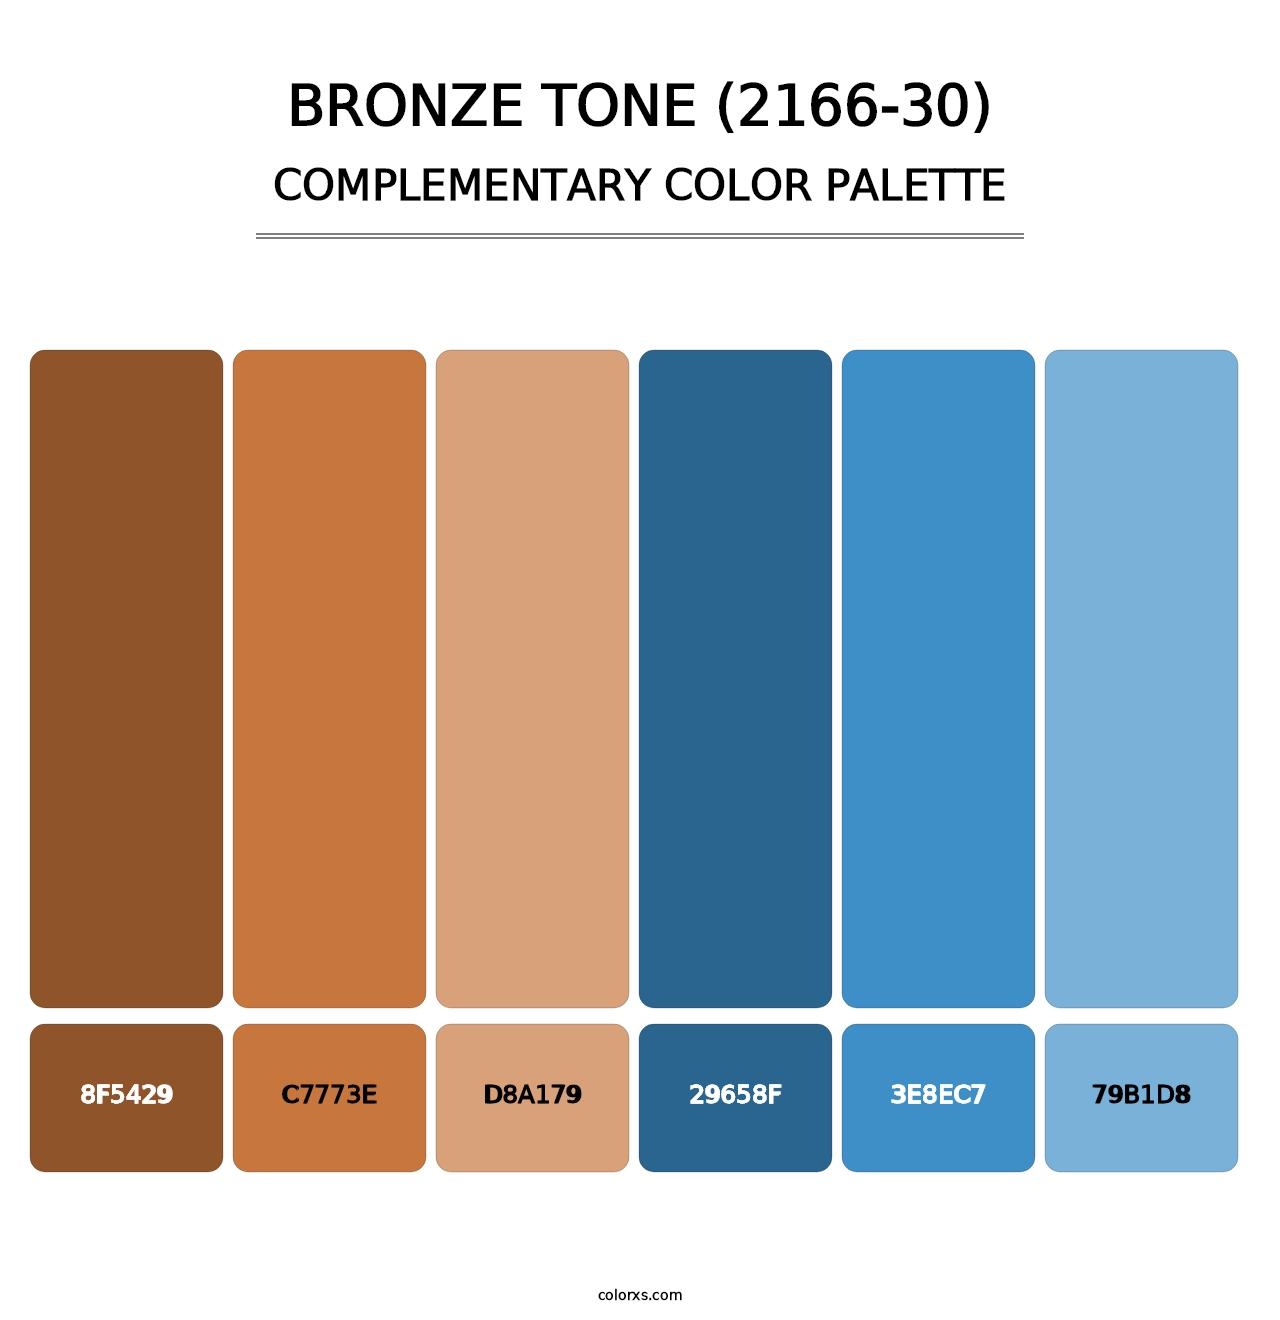 Bronze Tone (2166-30) - Complementary Color Palette